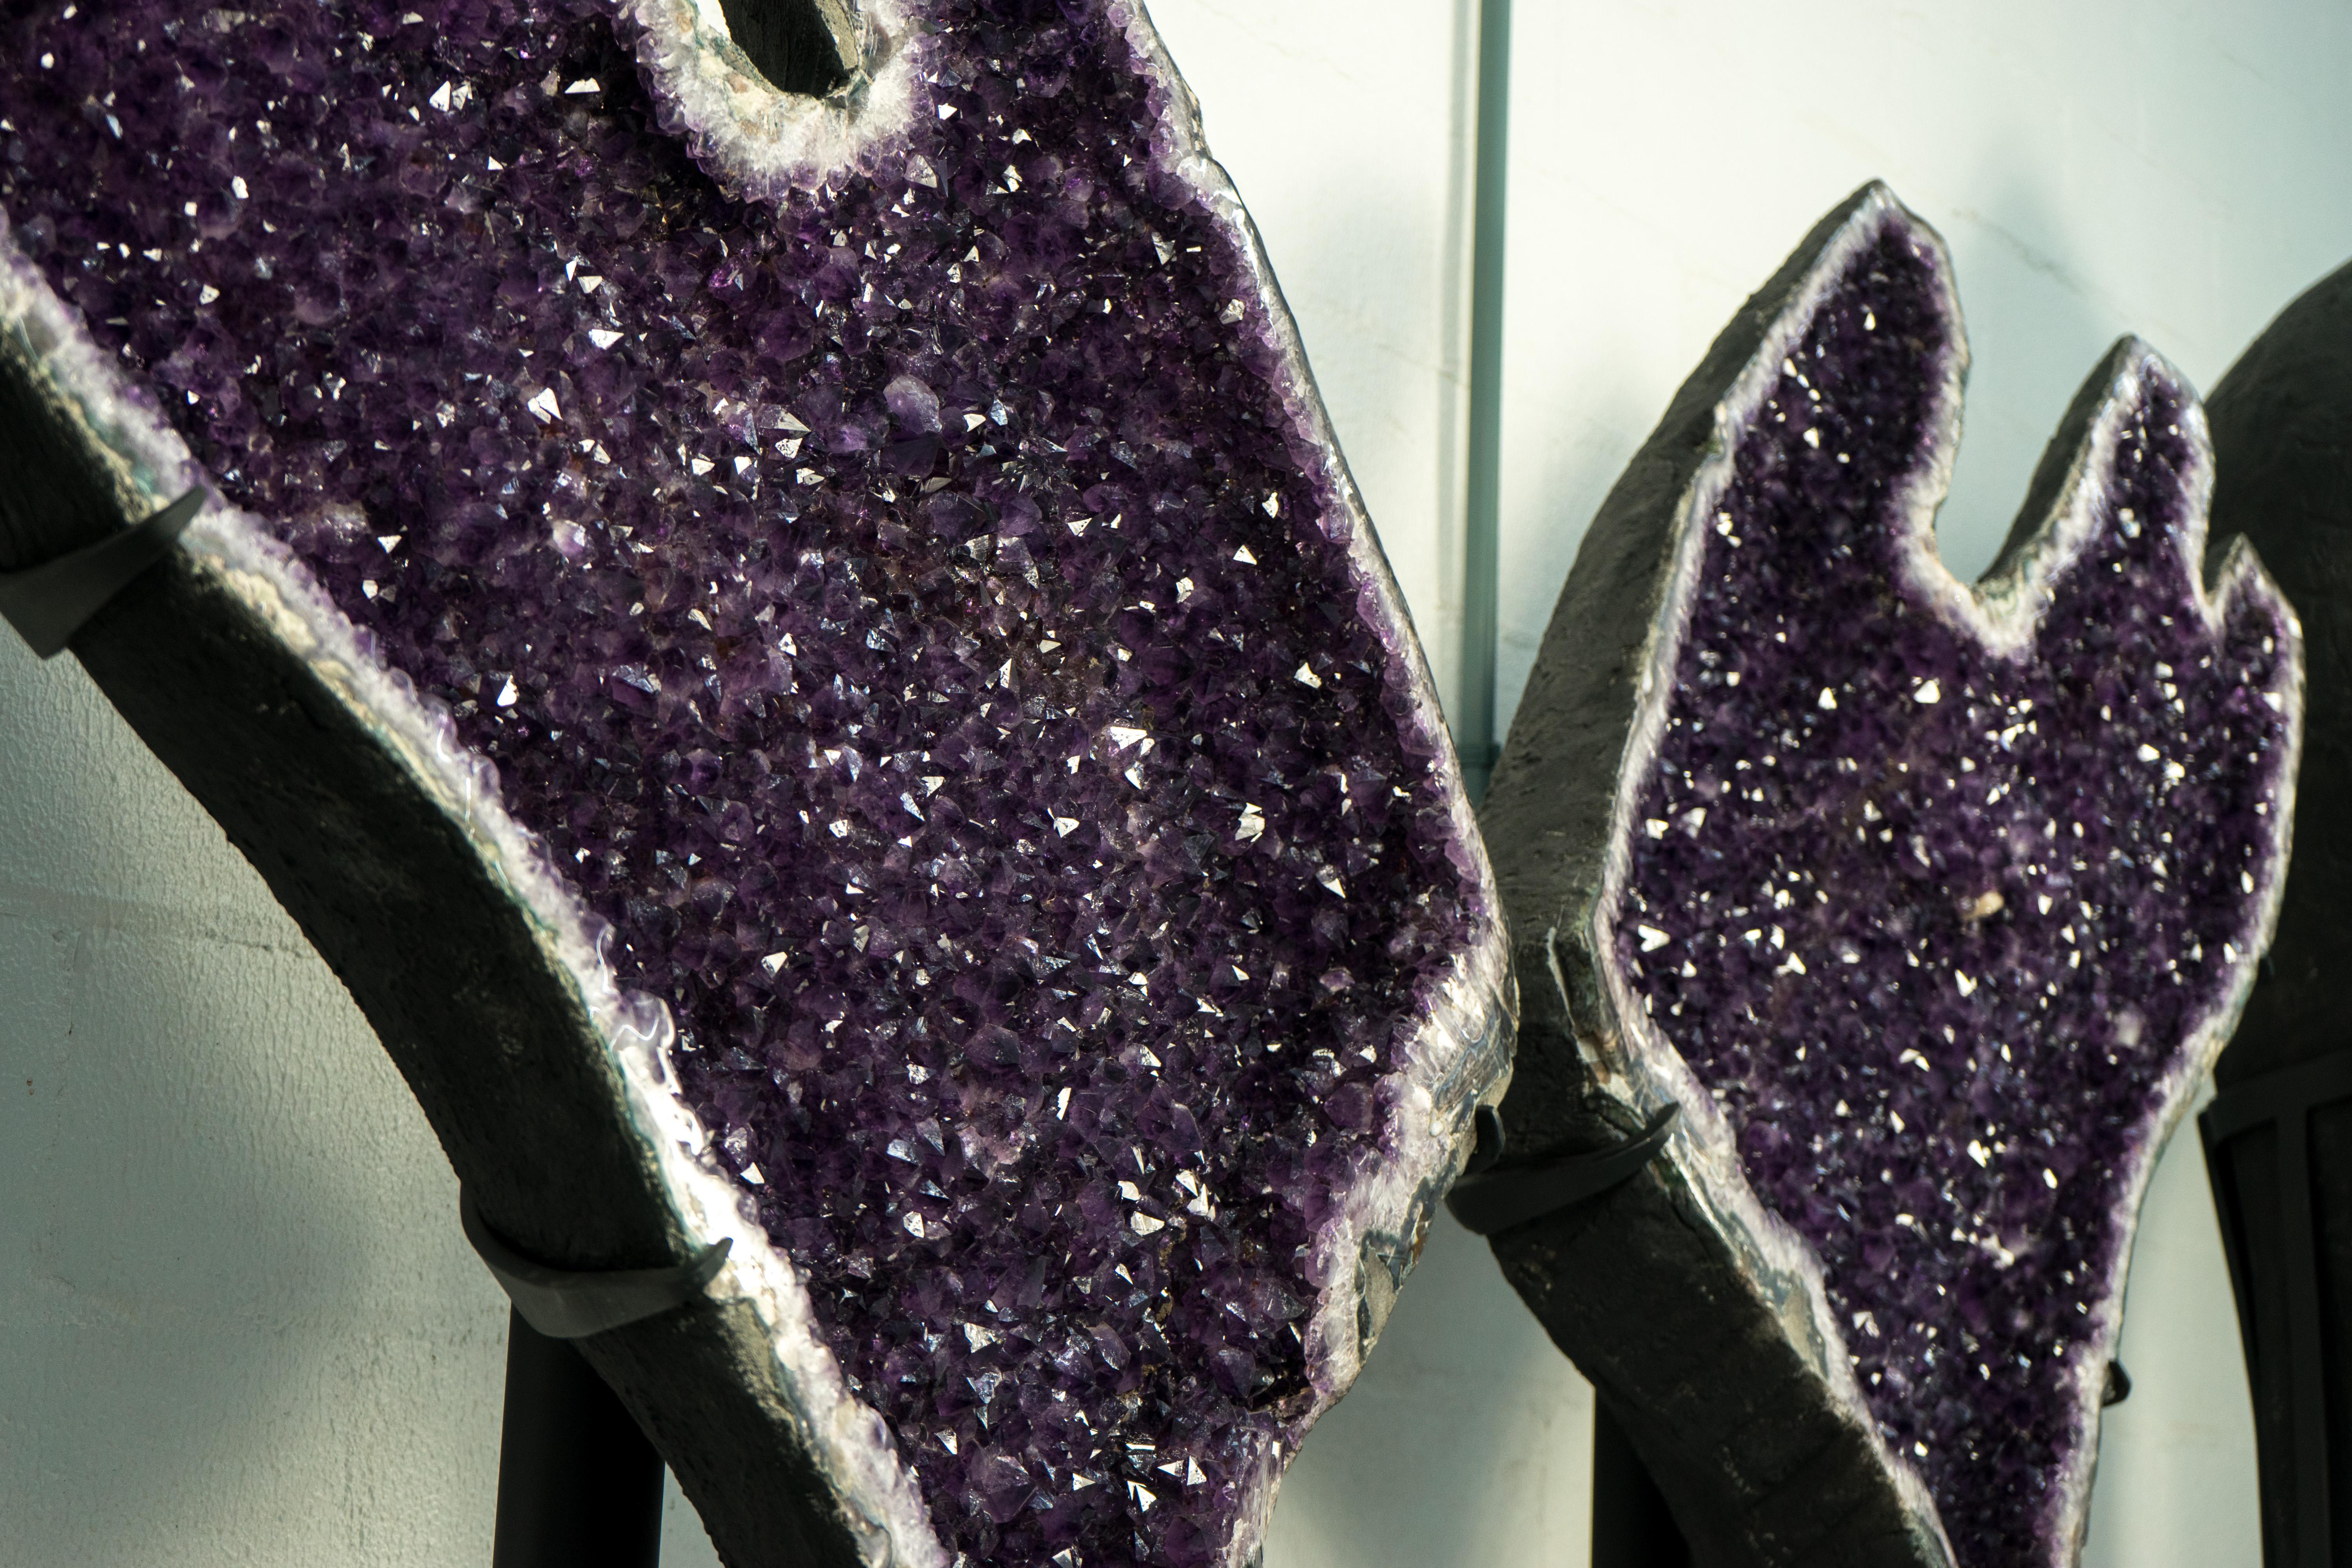 Sculptural 7 Ft Tall Giant Amethyst Geodes with High-Grade Deep Purple Amethyst For Sale 5